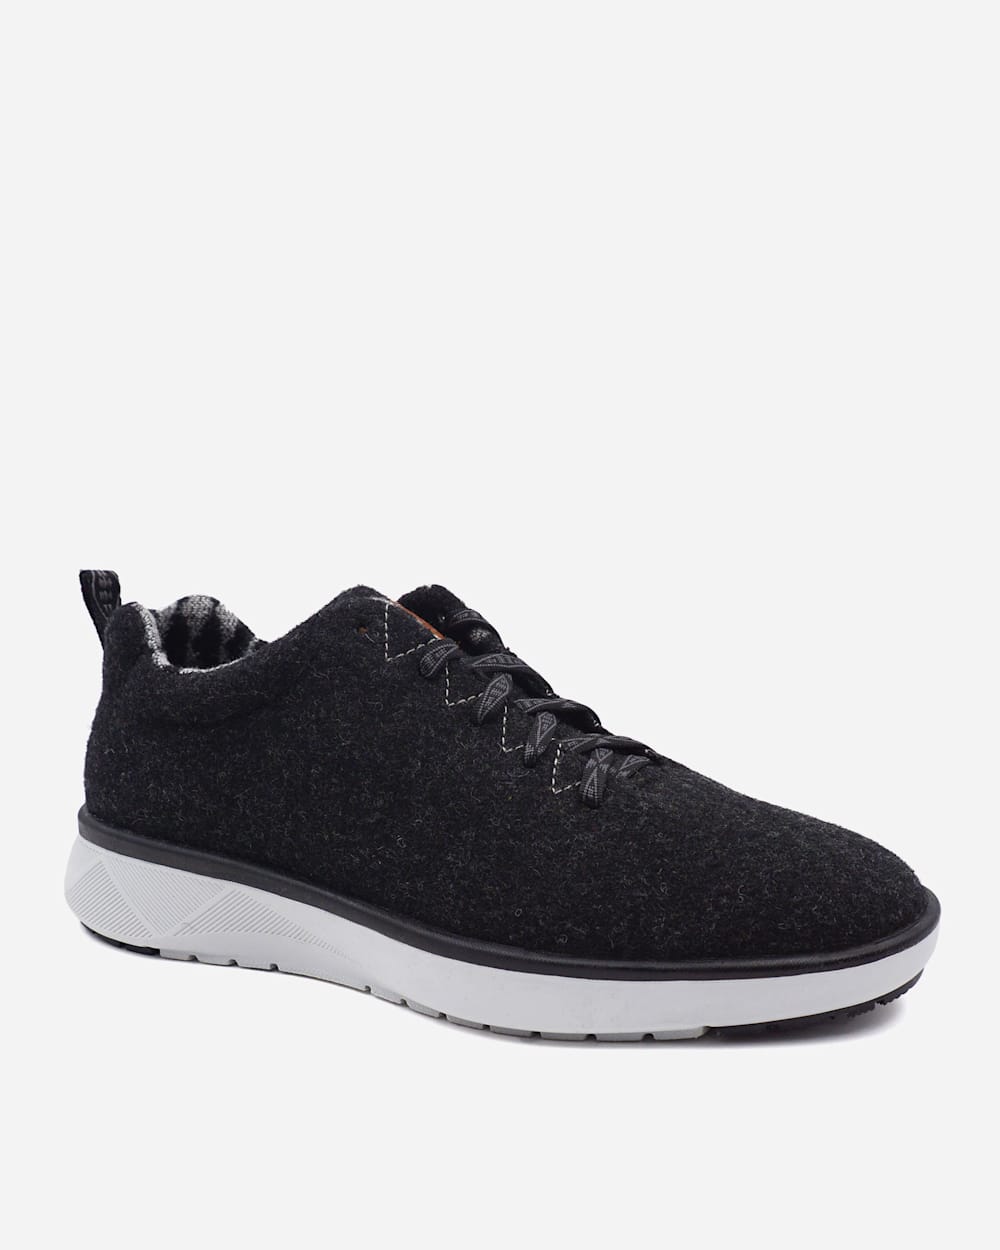 ALTERNATE VIEW OF WOMEN'S PENDLETON WOOL SNEAKERS IN CHARCOAL HEATHER image number 2